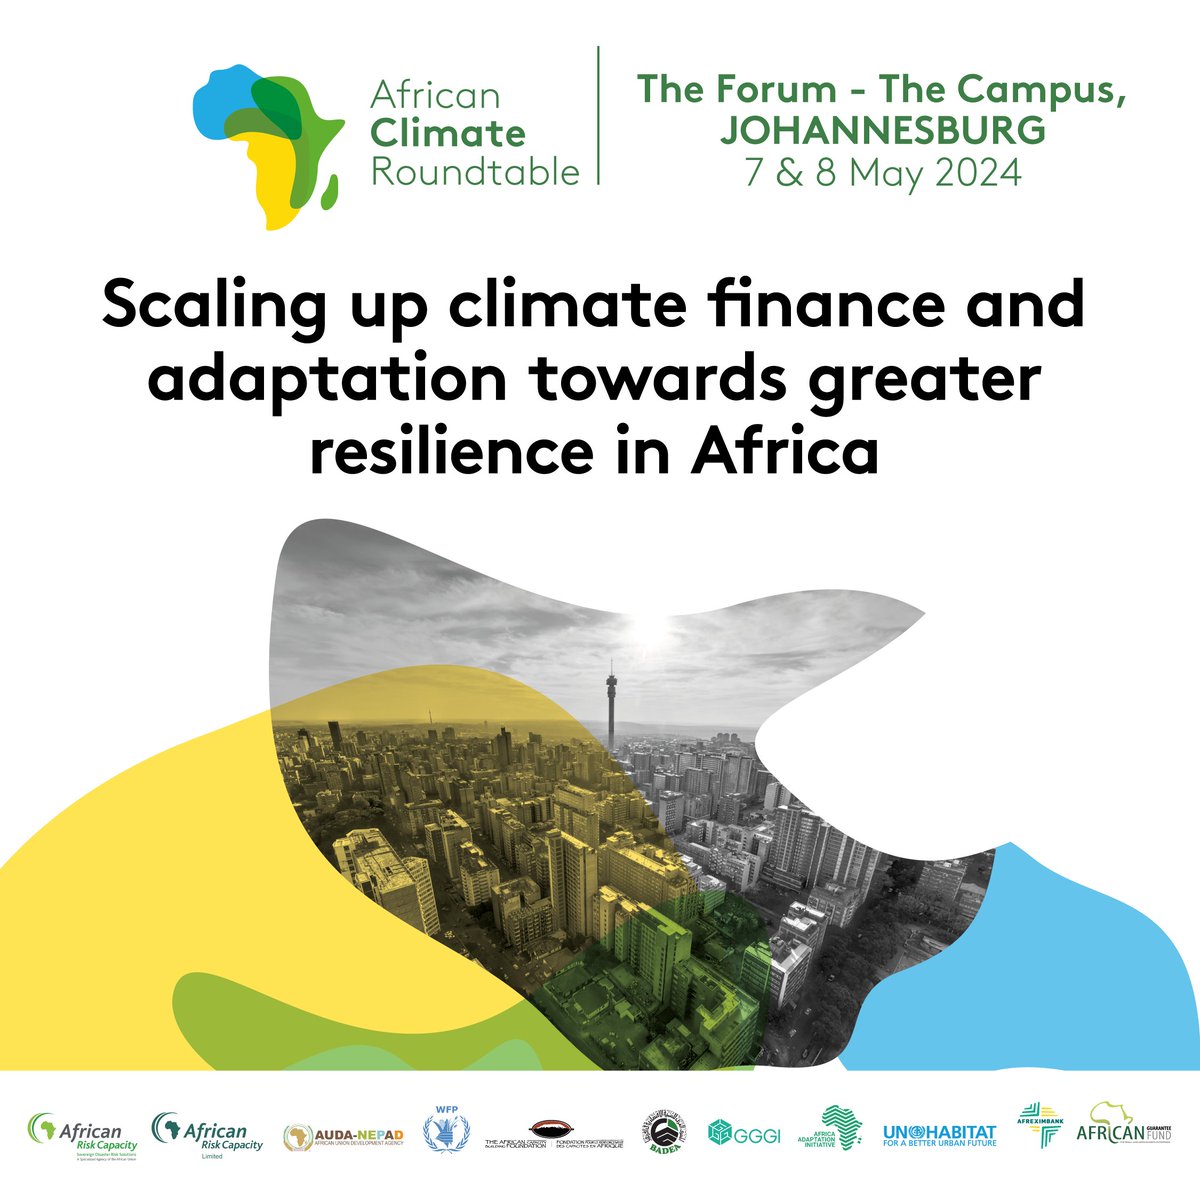 The #AfricanClimateRoundtable takes place in Johannesburg, South Africa from 7-8 May under the theme: Scaling up climate finance and adaptation towards greater resilience in #Africa. Join us to discuss #ClimateAdaptation & #ClimateFinance in #Africa. #ACR2024 #ClimateAction